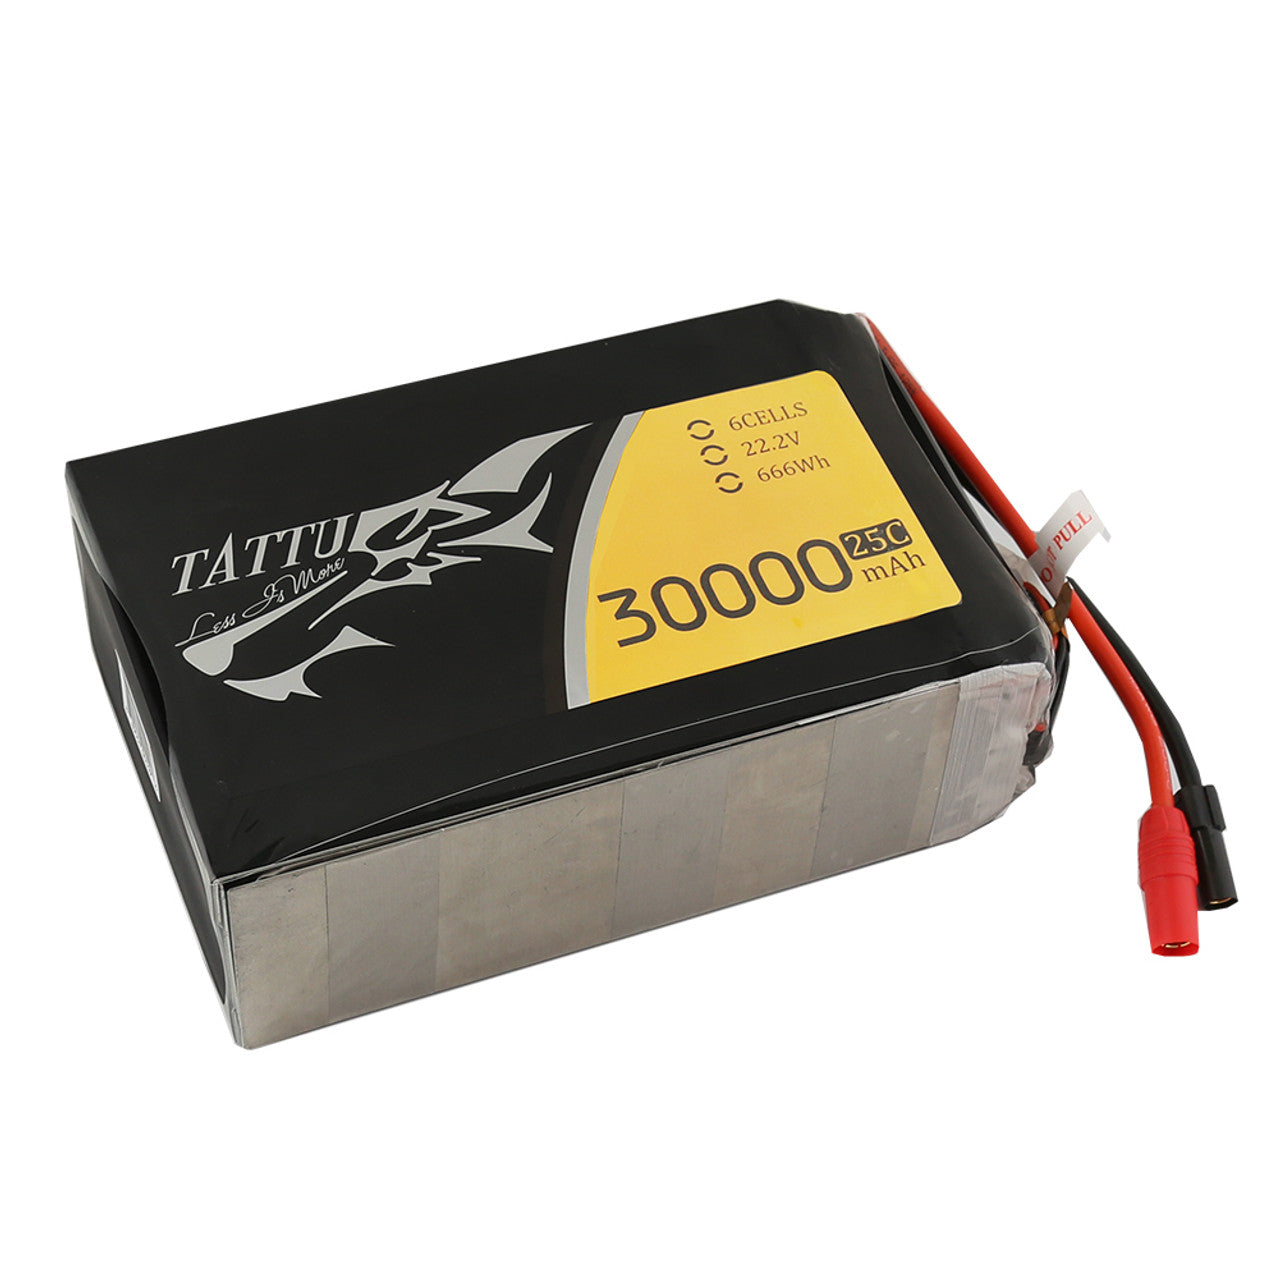 Tattu G-Tech 30000mAh 6S 22.2V 25C Lipo Battery, Lithium-ion battery pack with 6S config, 22.2V voltage, and 66.6Wh capacity for power-hungry devices.